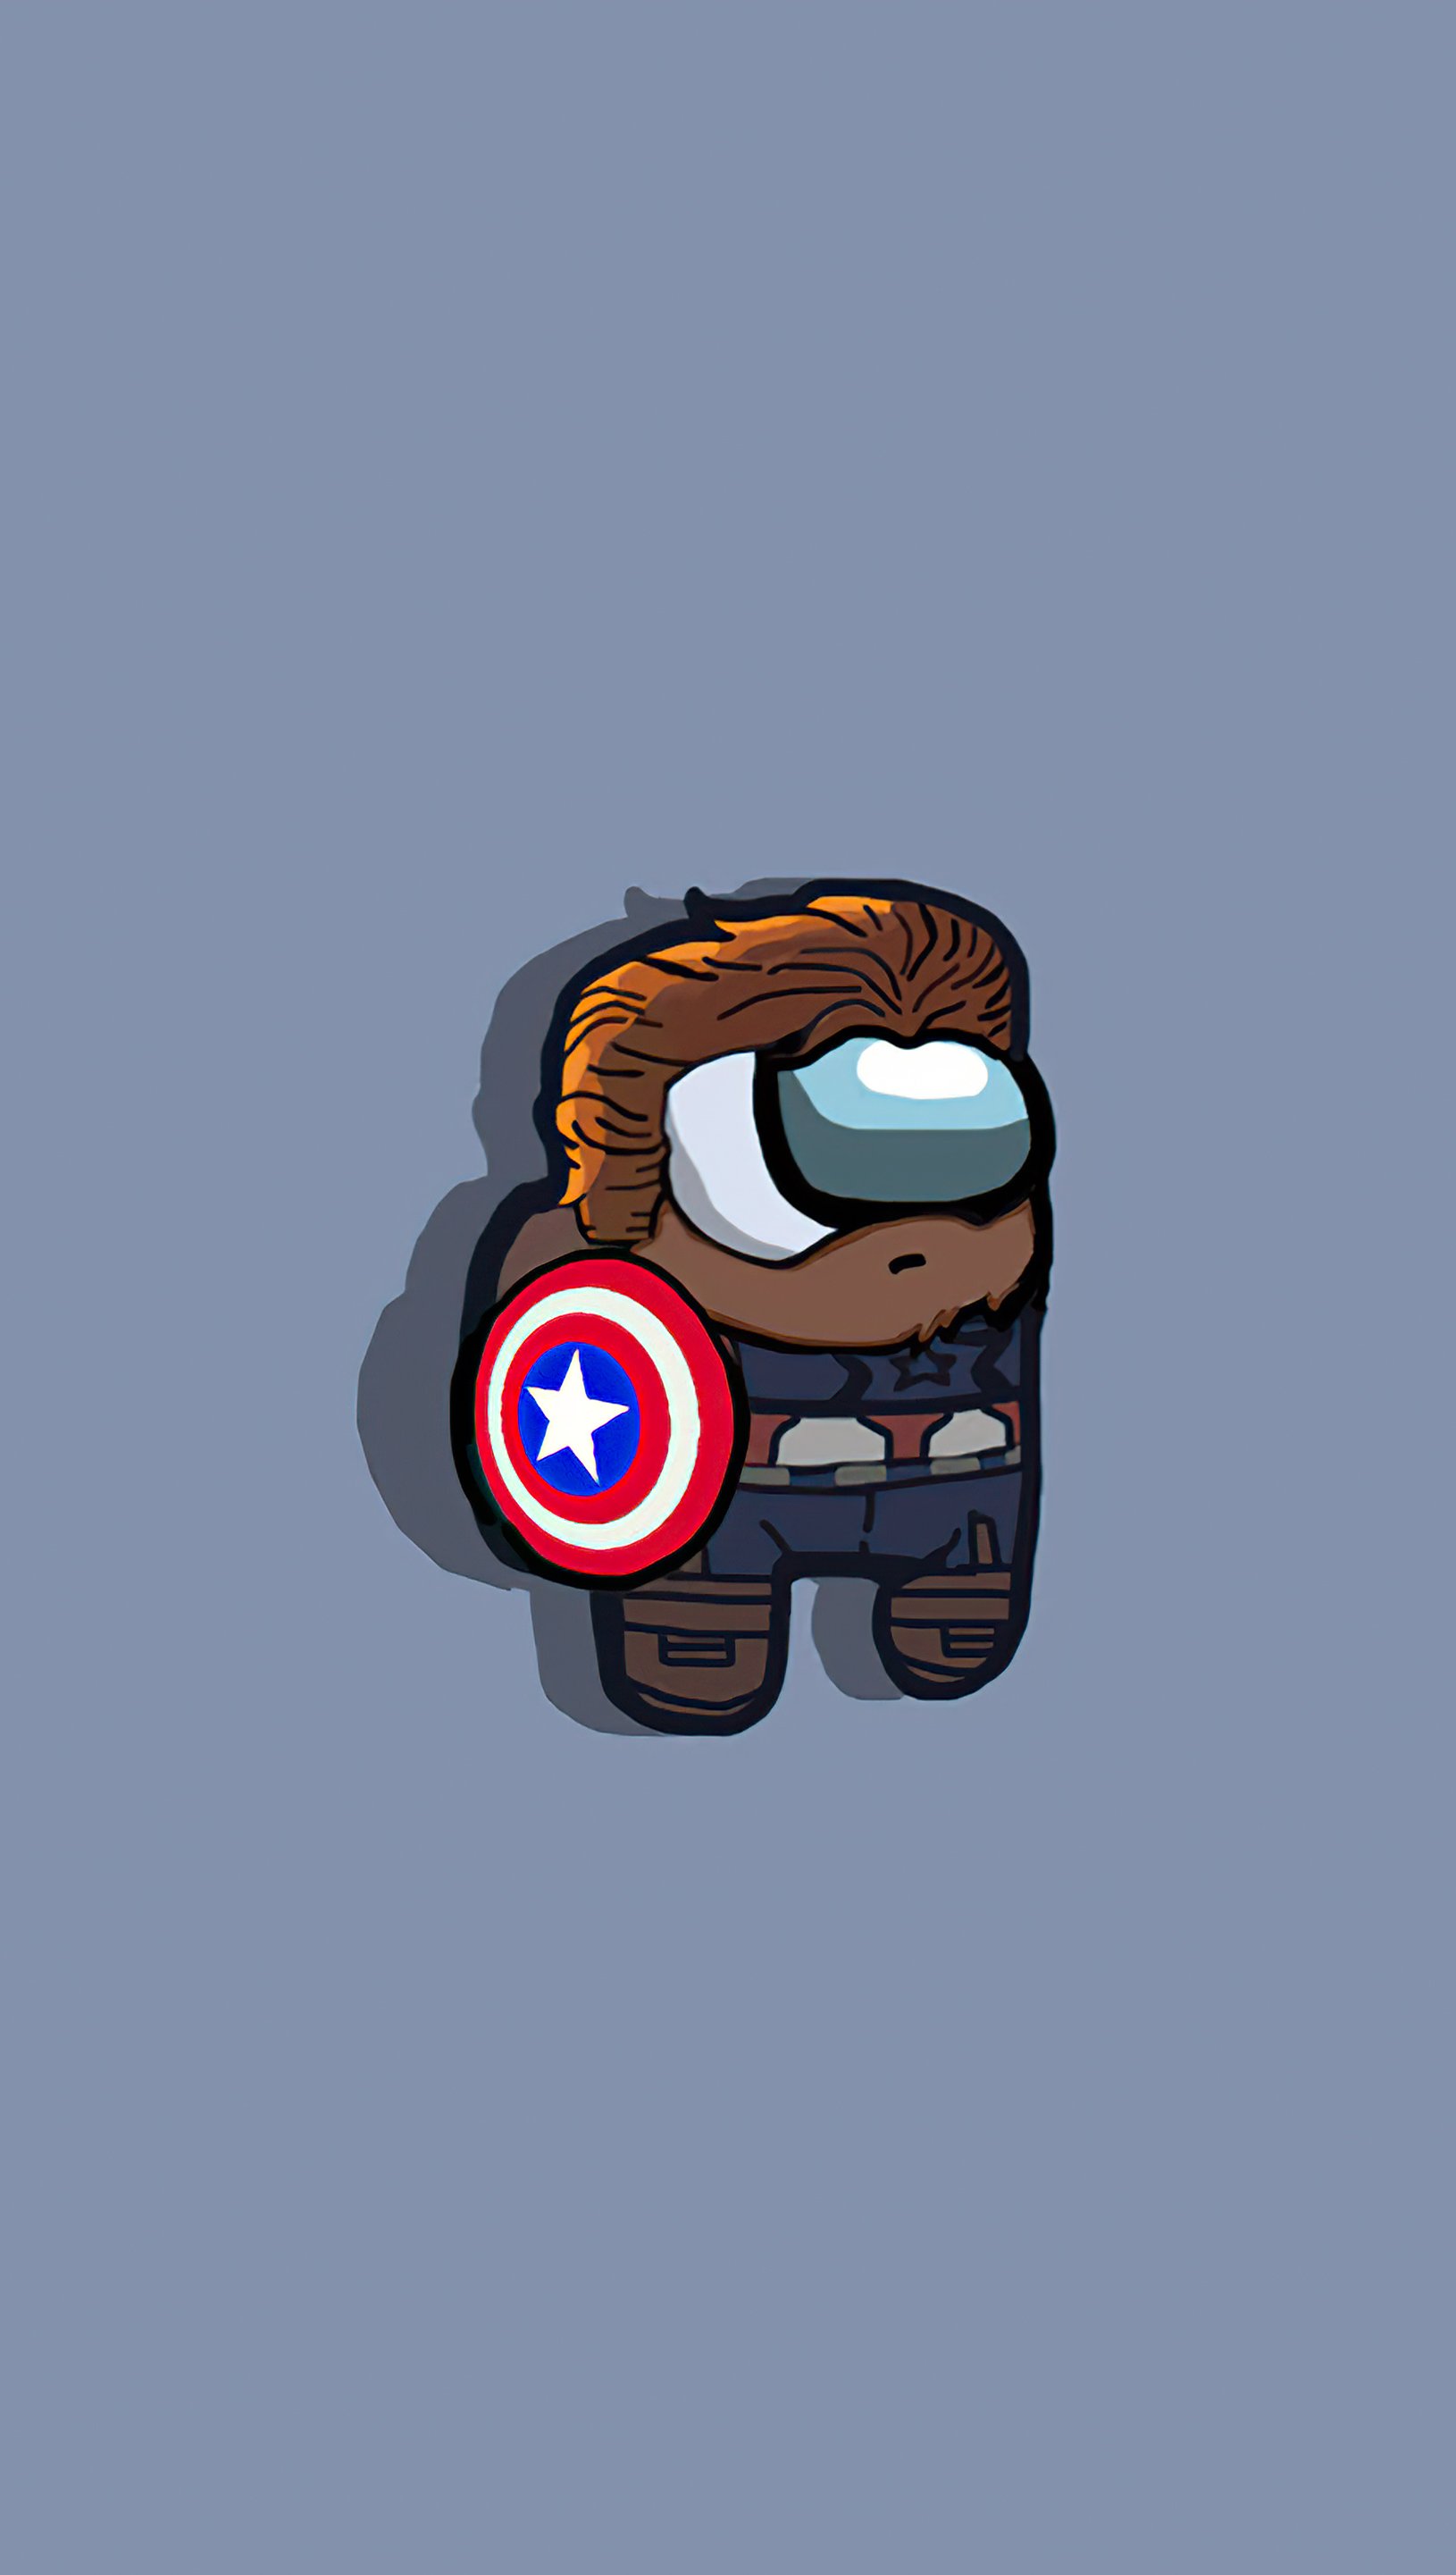 Captain America as character from Among us Wallpaper 5k Ultra HD